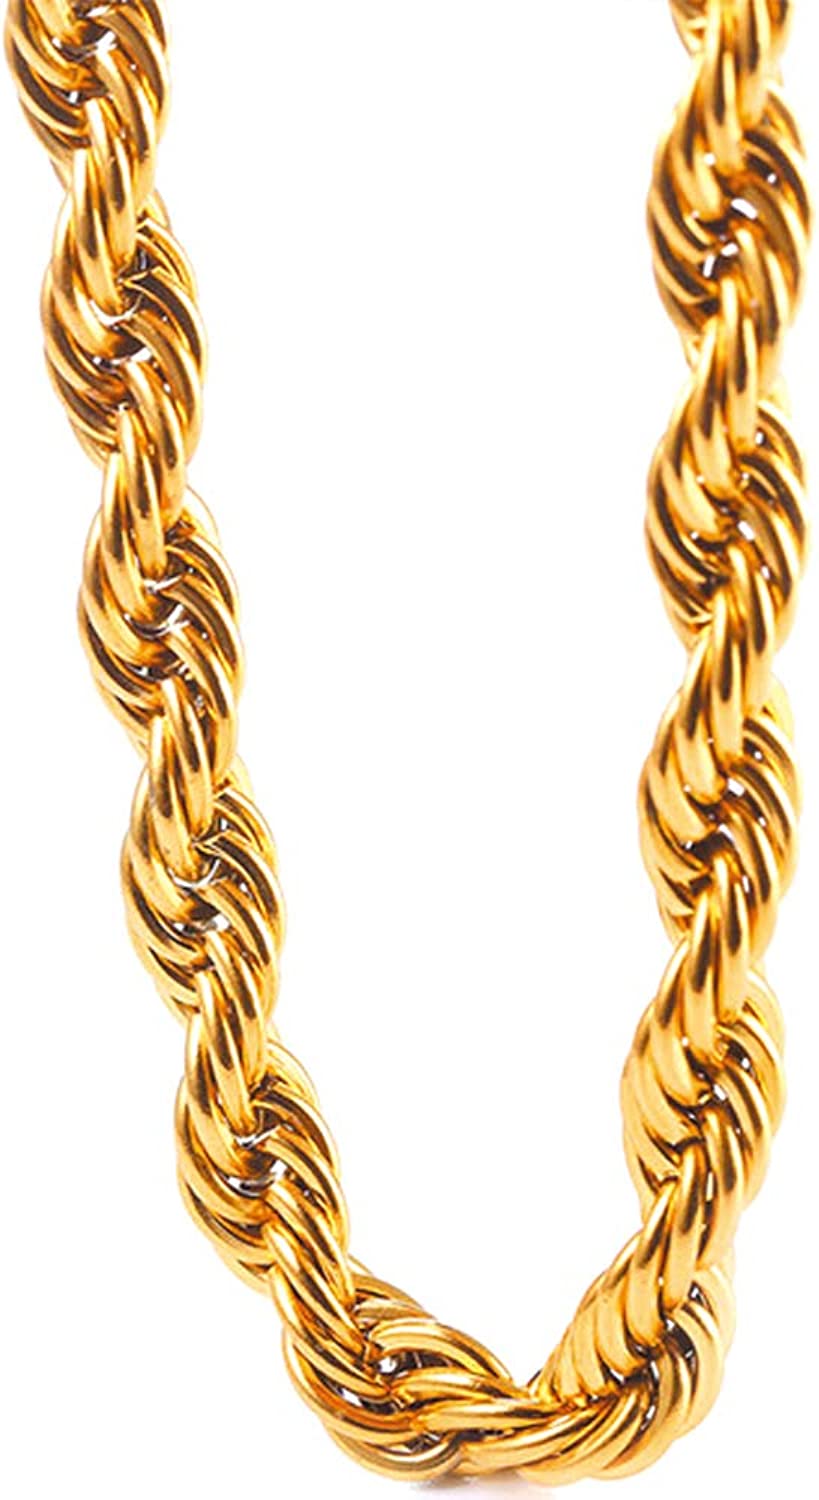 TUOKAY Sparkling Big Faux 18K Gold Rope Chain for Men and Women 30in Long by 11mm Thick Heavy Huge Faux Gold Rope Chain Costume Necklace for Rapper and Rap Gangsta